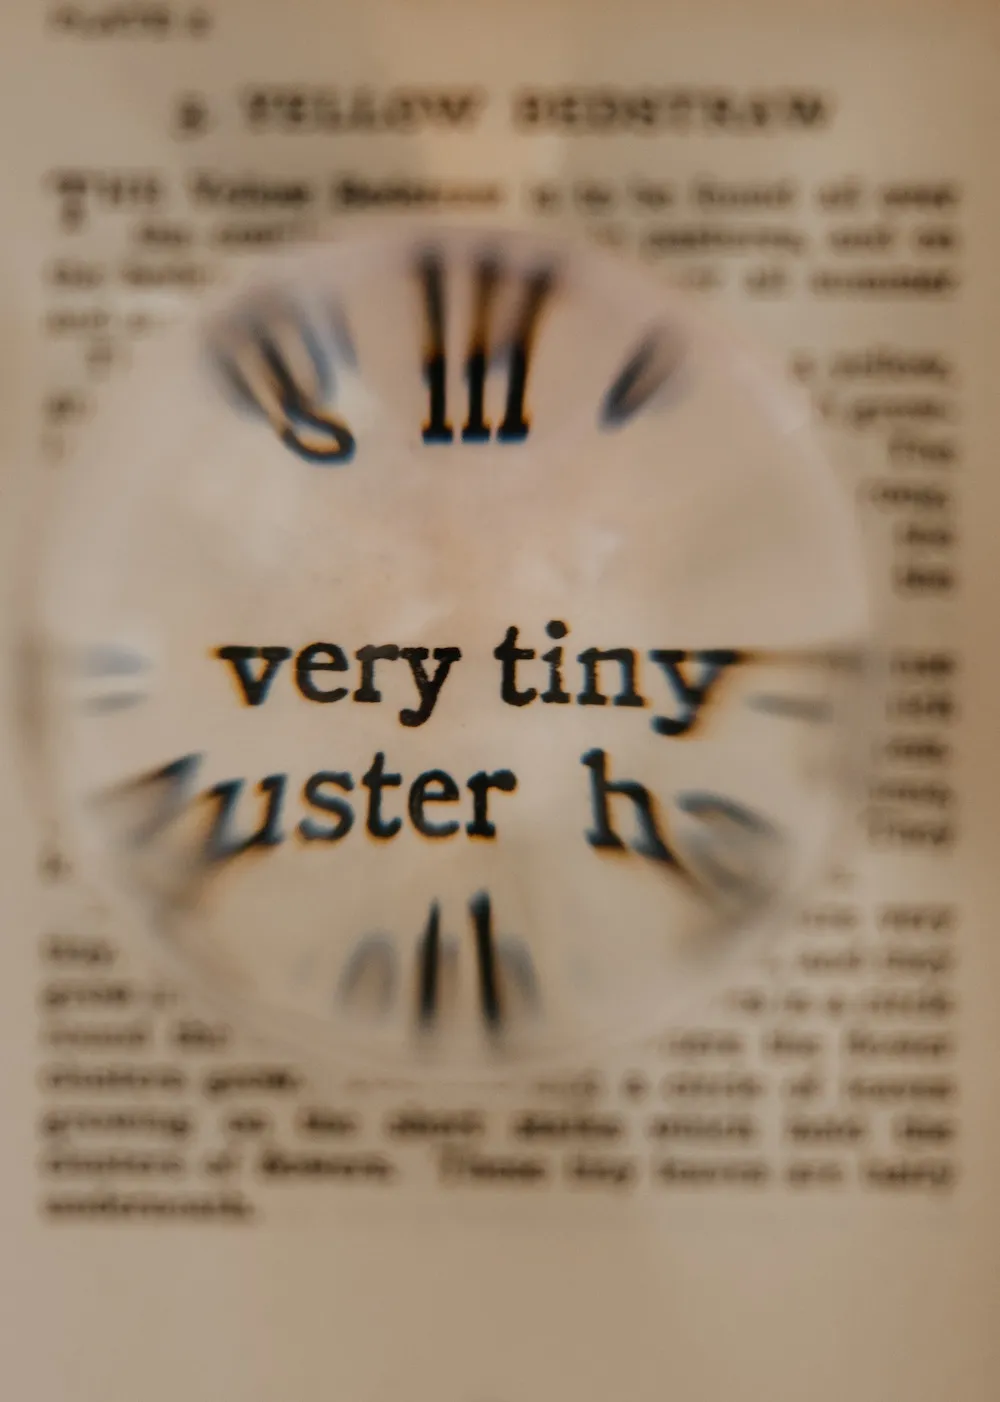 Text in a book that reads "very tiny" enlarged by a magnifying glass.